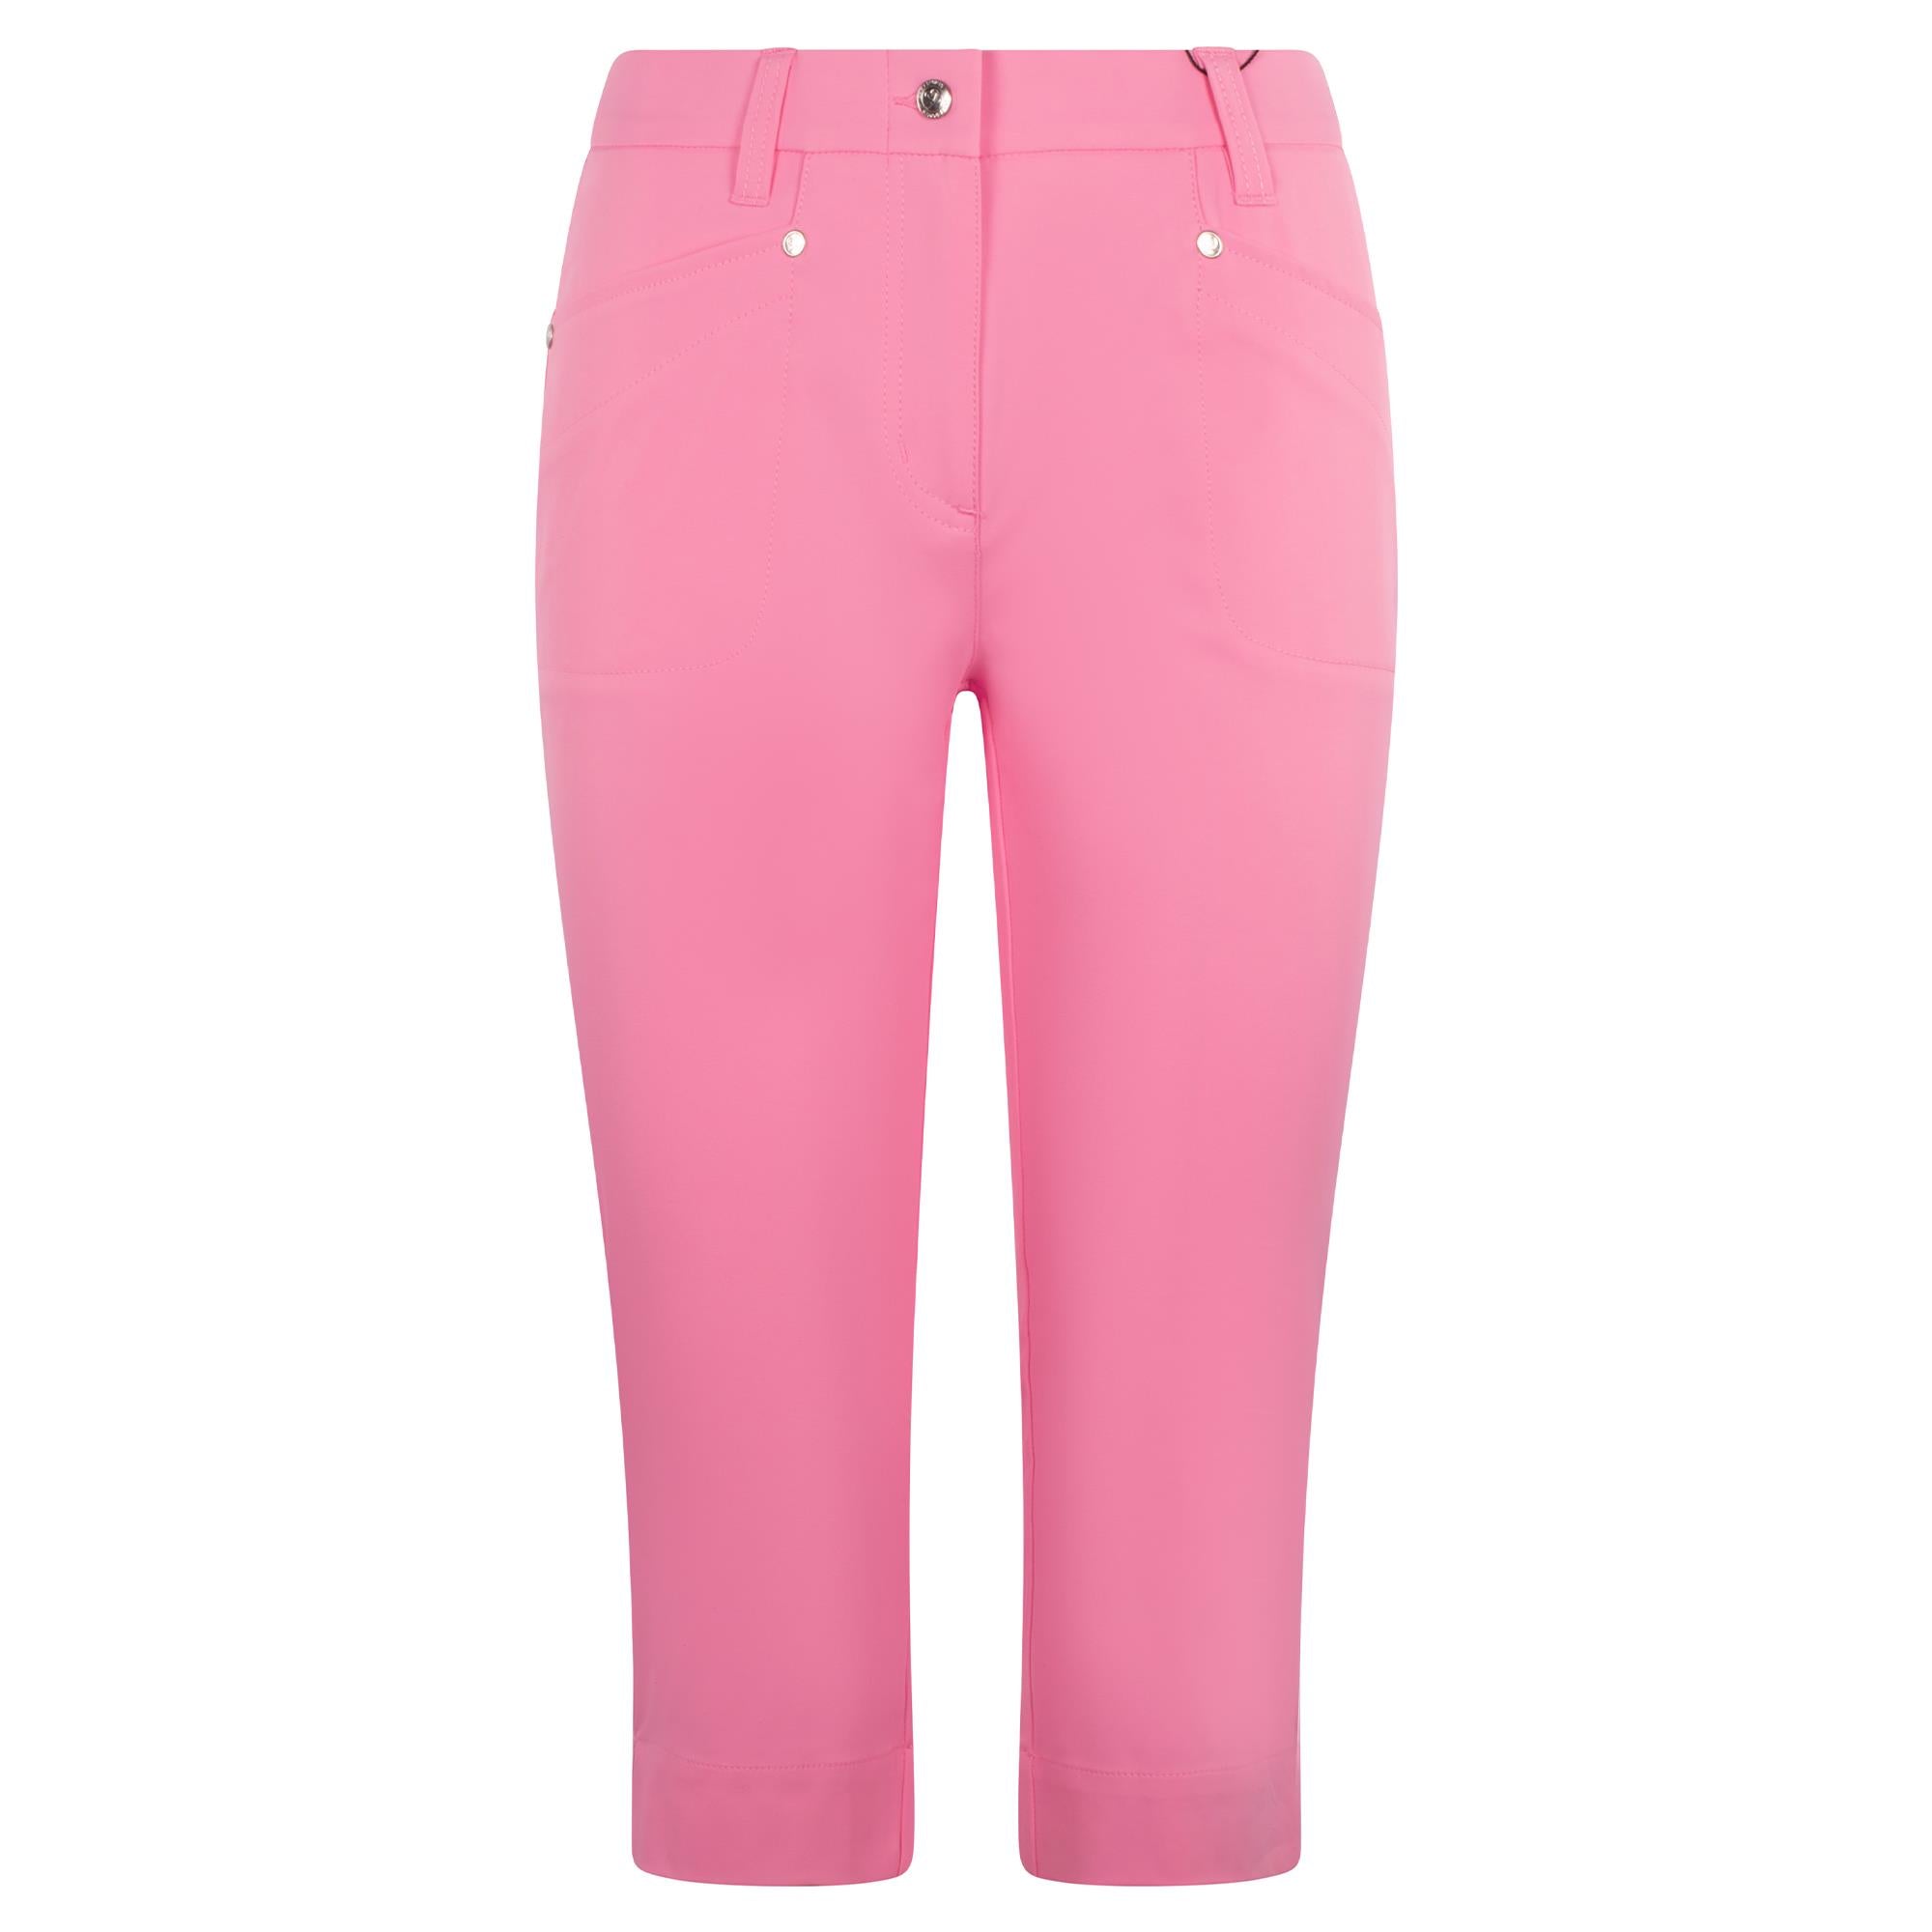 Daily Sports Lyric Woman's High Water Pants 32 - Coral - Fore